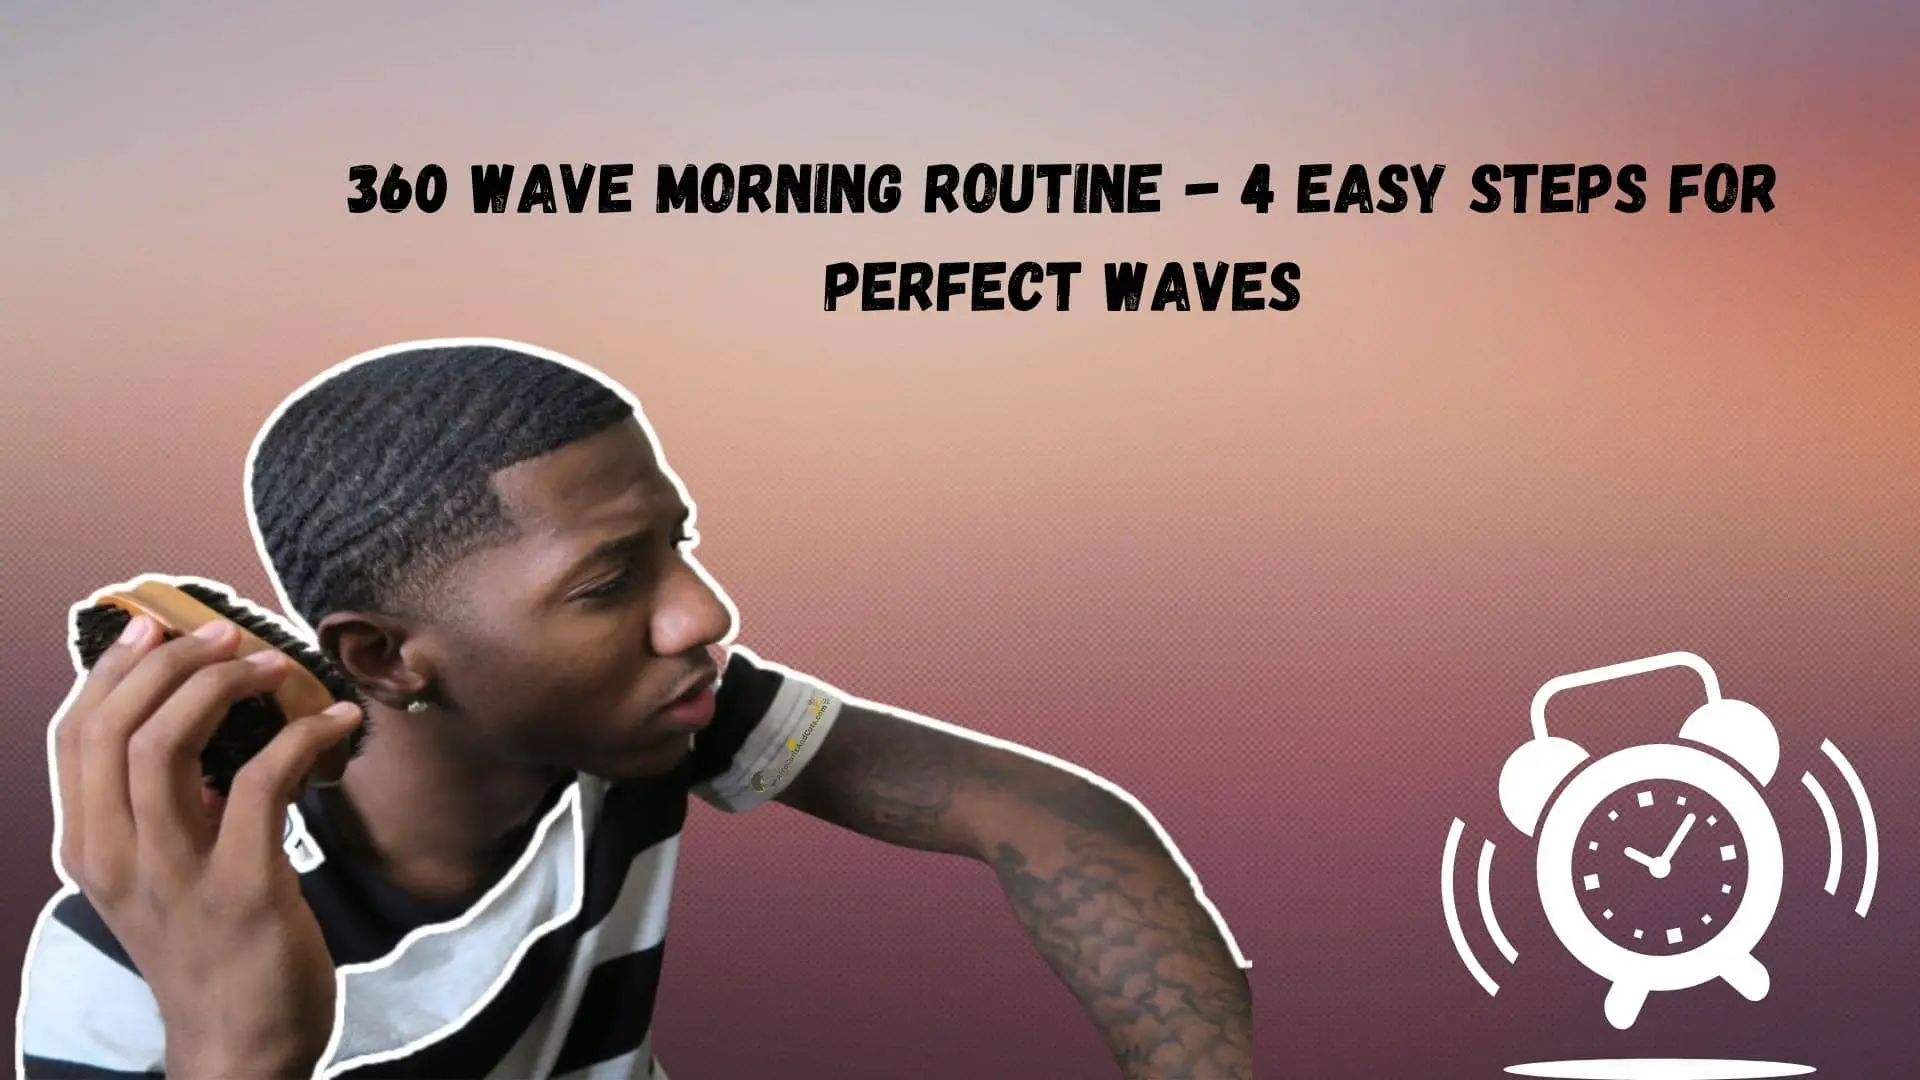 360 waves routine for the mornings